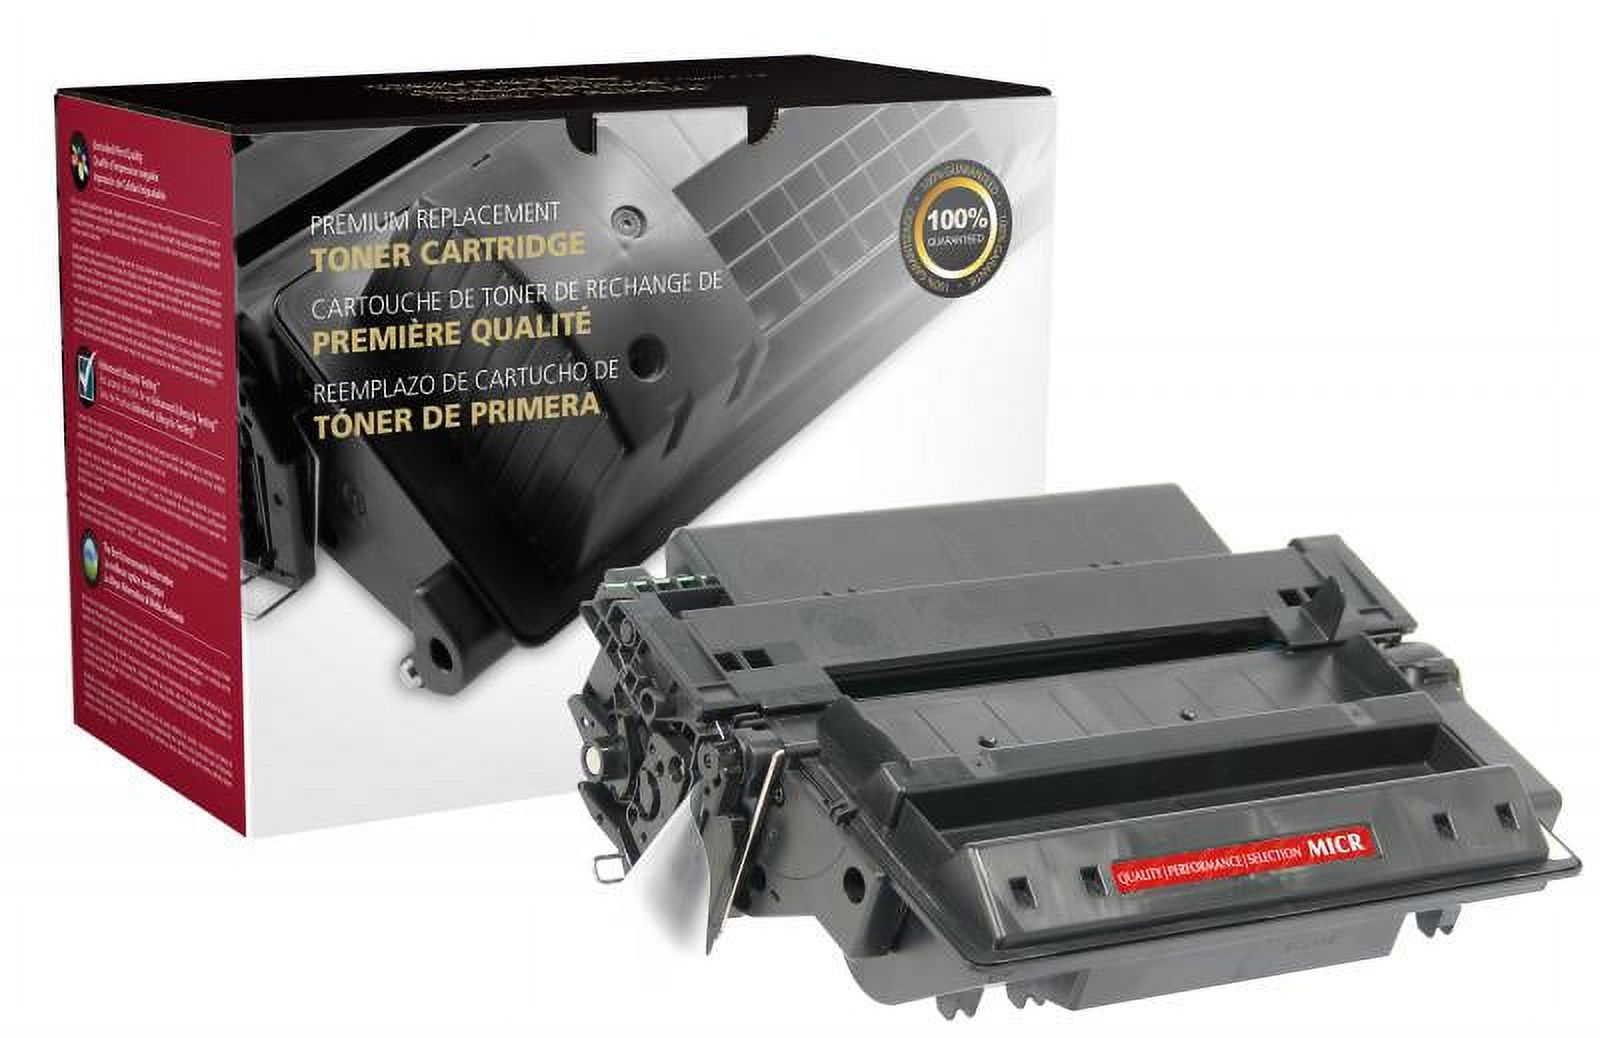 Clover Imaging Remanufactured High Yield MICR Toner Cartridge for Q7551X ( 51X), TROY 02-81200-001 - image 1 of 4